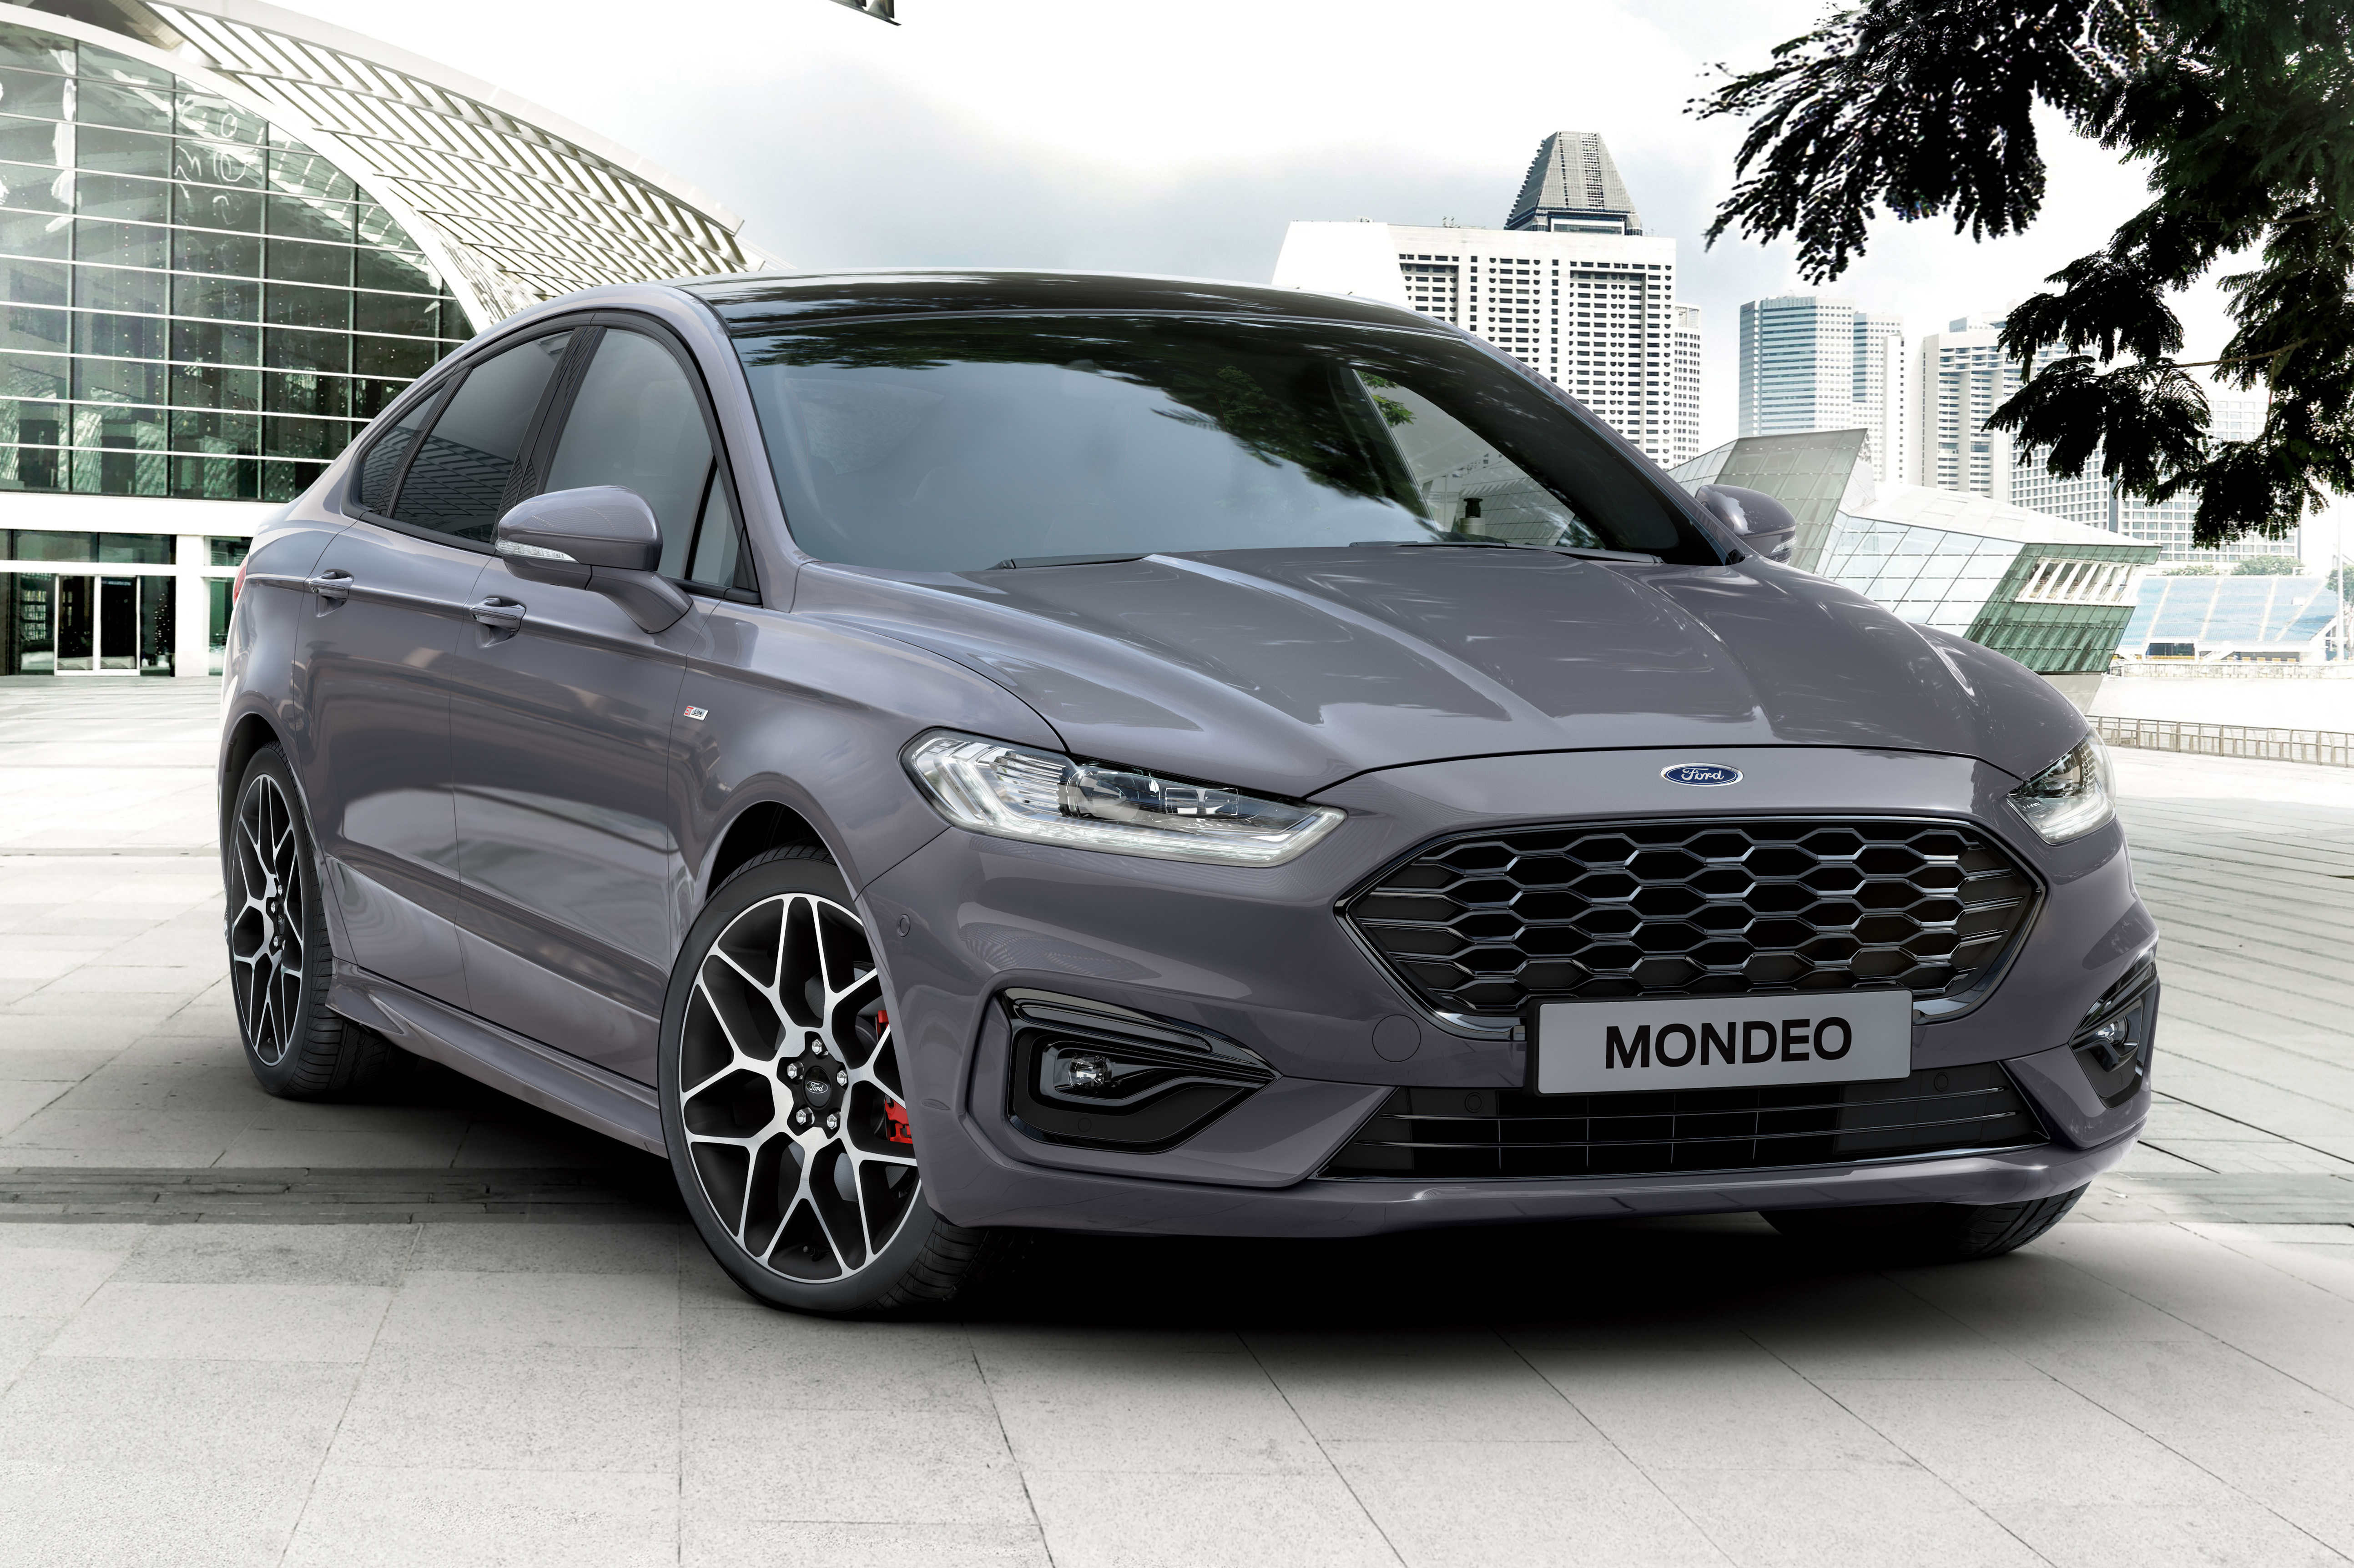 Voetzool Netelig Zeeslak Ford Mondeo to be discontinued in March 2022 after 29 years | Autocar